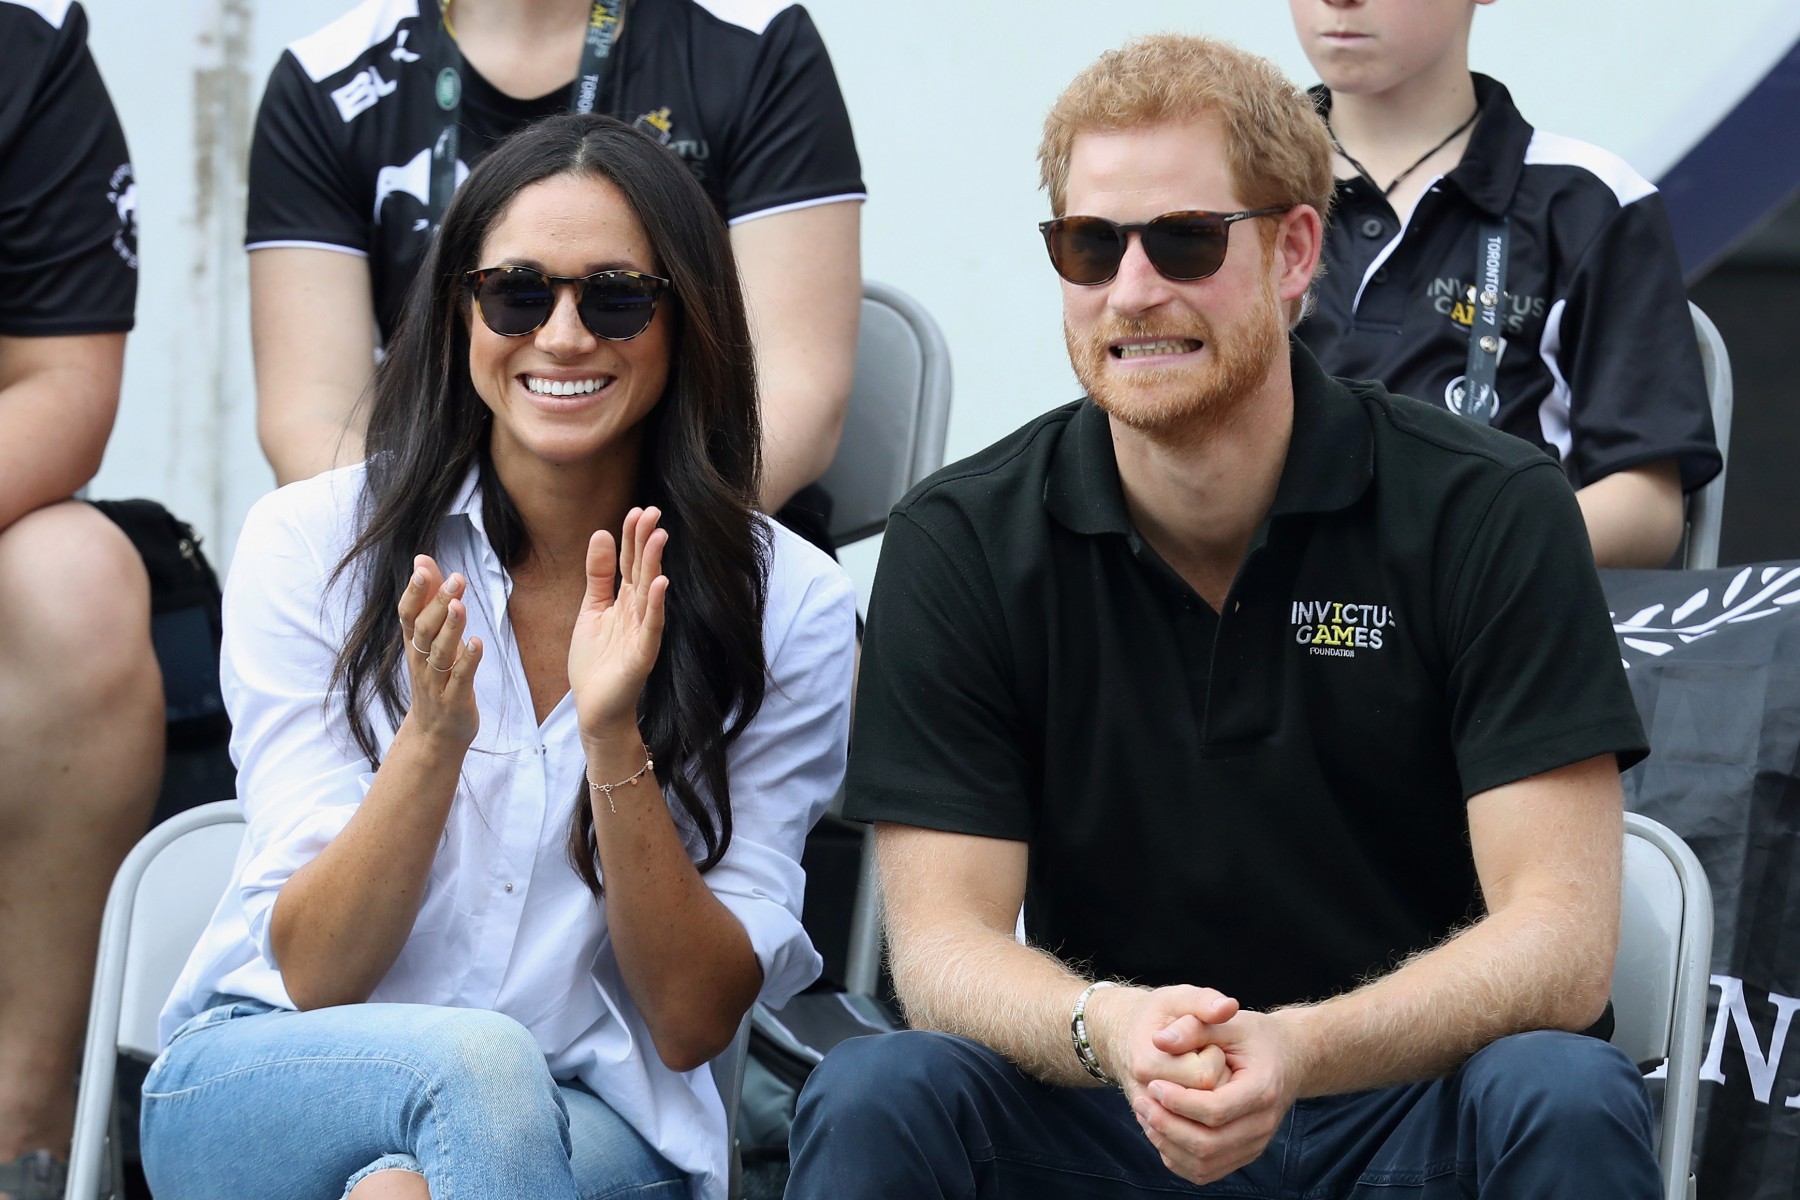 Prince Harry will be able to continue his work on the Invictus Games